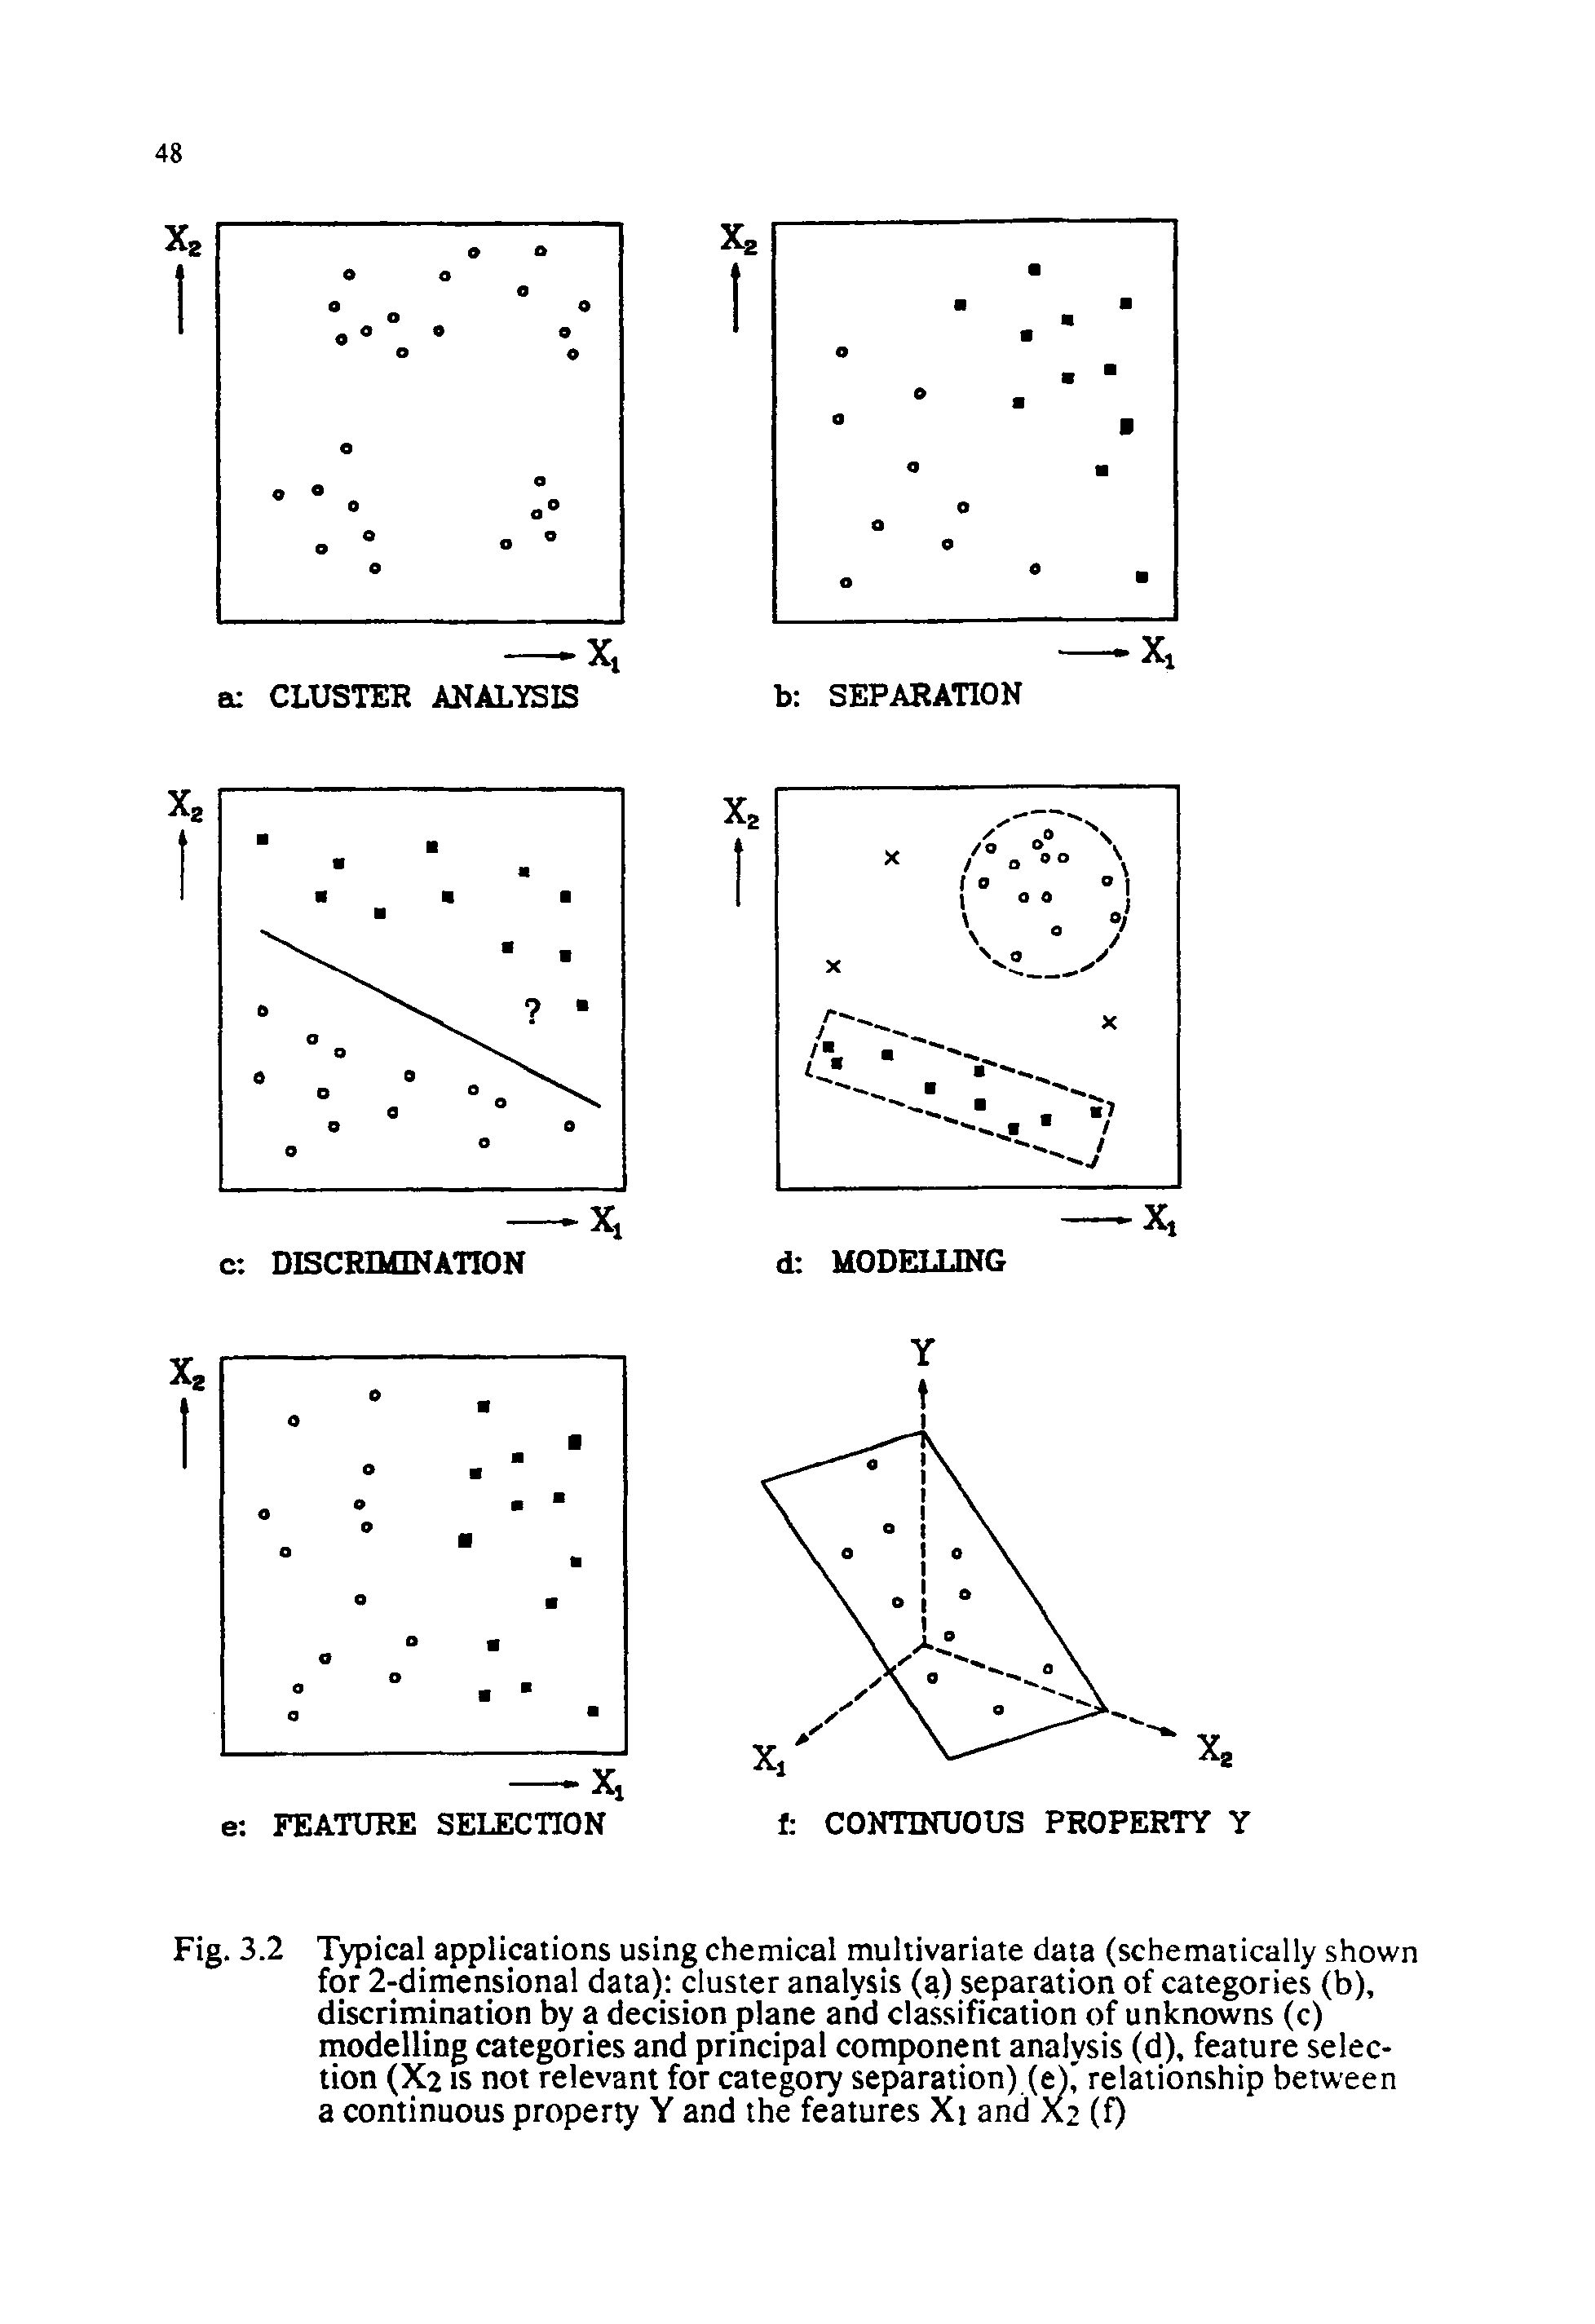 Fig. 3.2 Typical applications using chemical multivariate data (schematically shown for 2-dimensional data) cluster analysis (a) separation of categories (b), discrimination by a decision plane and classification of unknowns (c) modelling categories and principal component analysis (d), feature selection (X2 is not relevant for category separation) (eY relationship between a continuous property Y and the features Xi and X2 (f)...